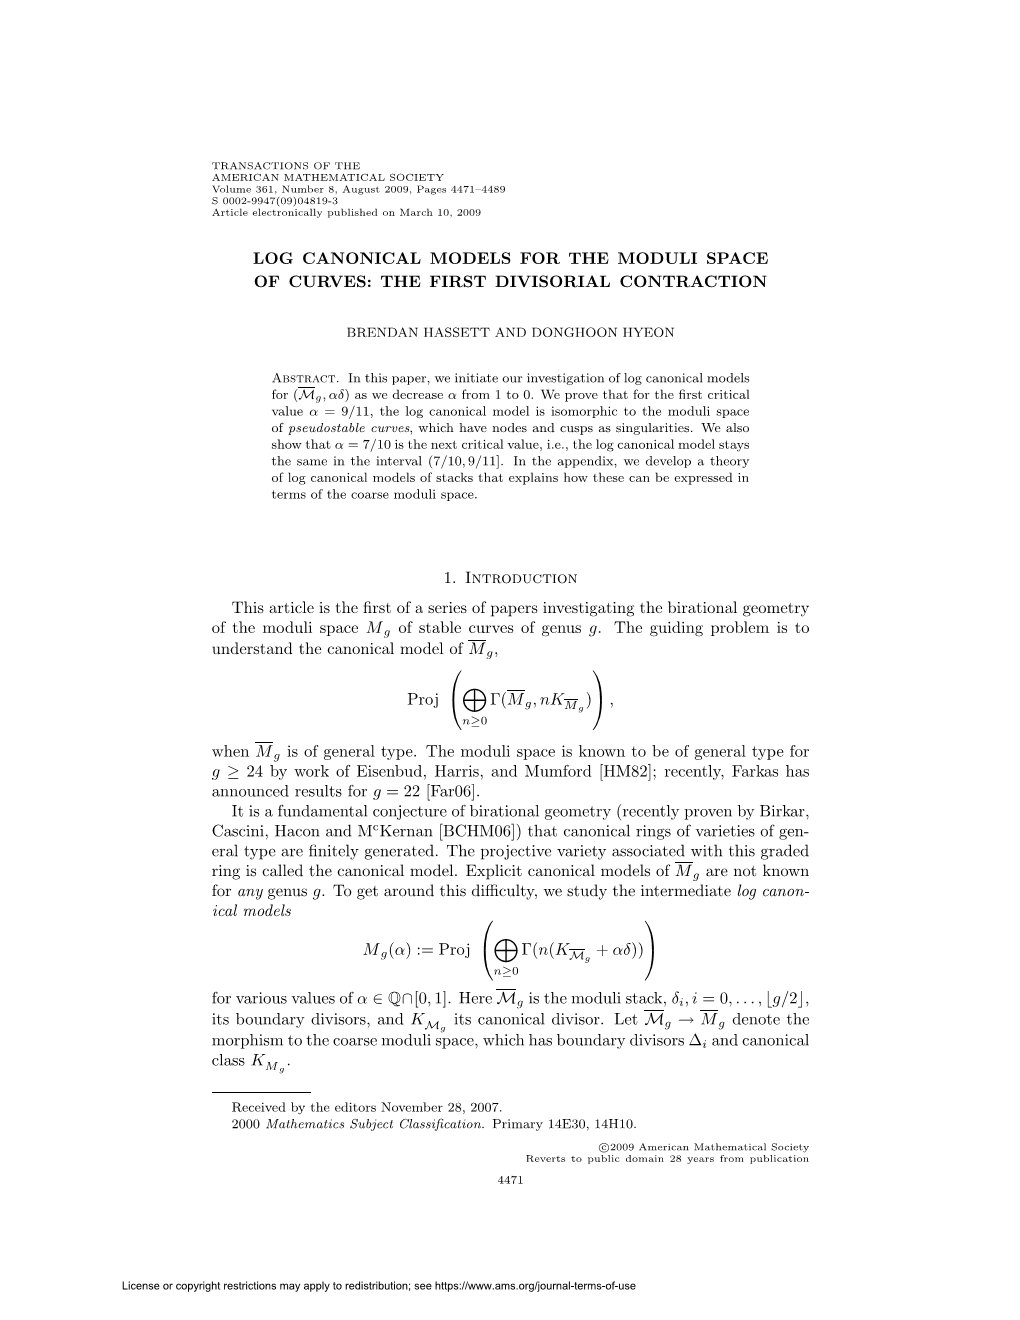 Log Canonical Models for the Moduli Space of Curves: the First Divisorial Contraction